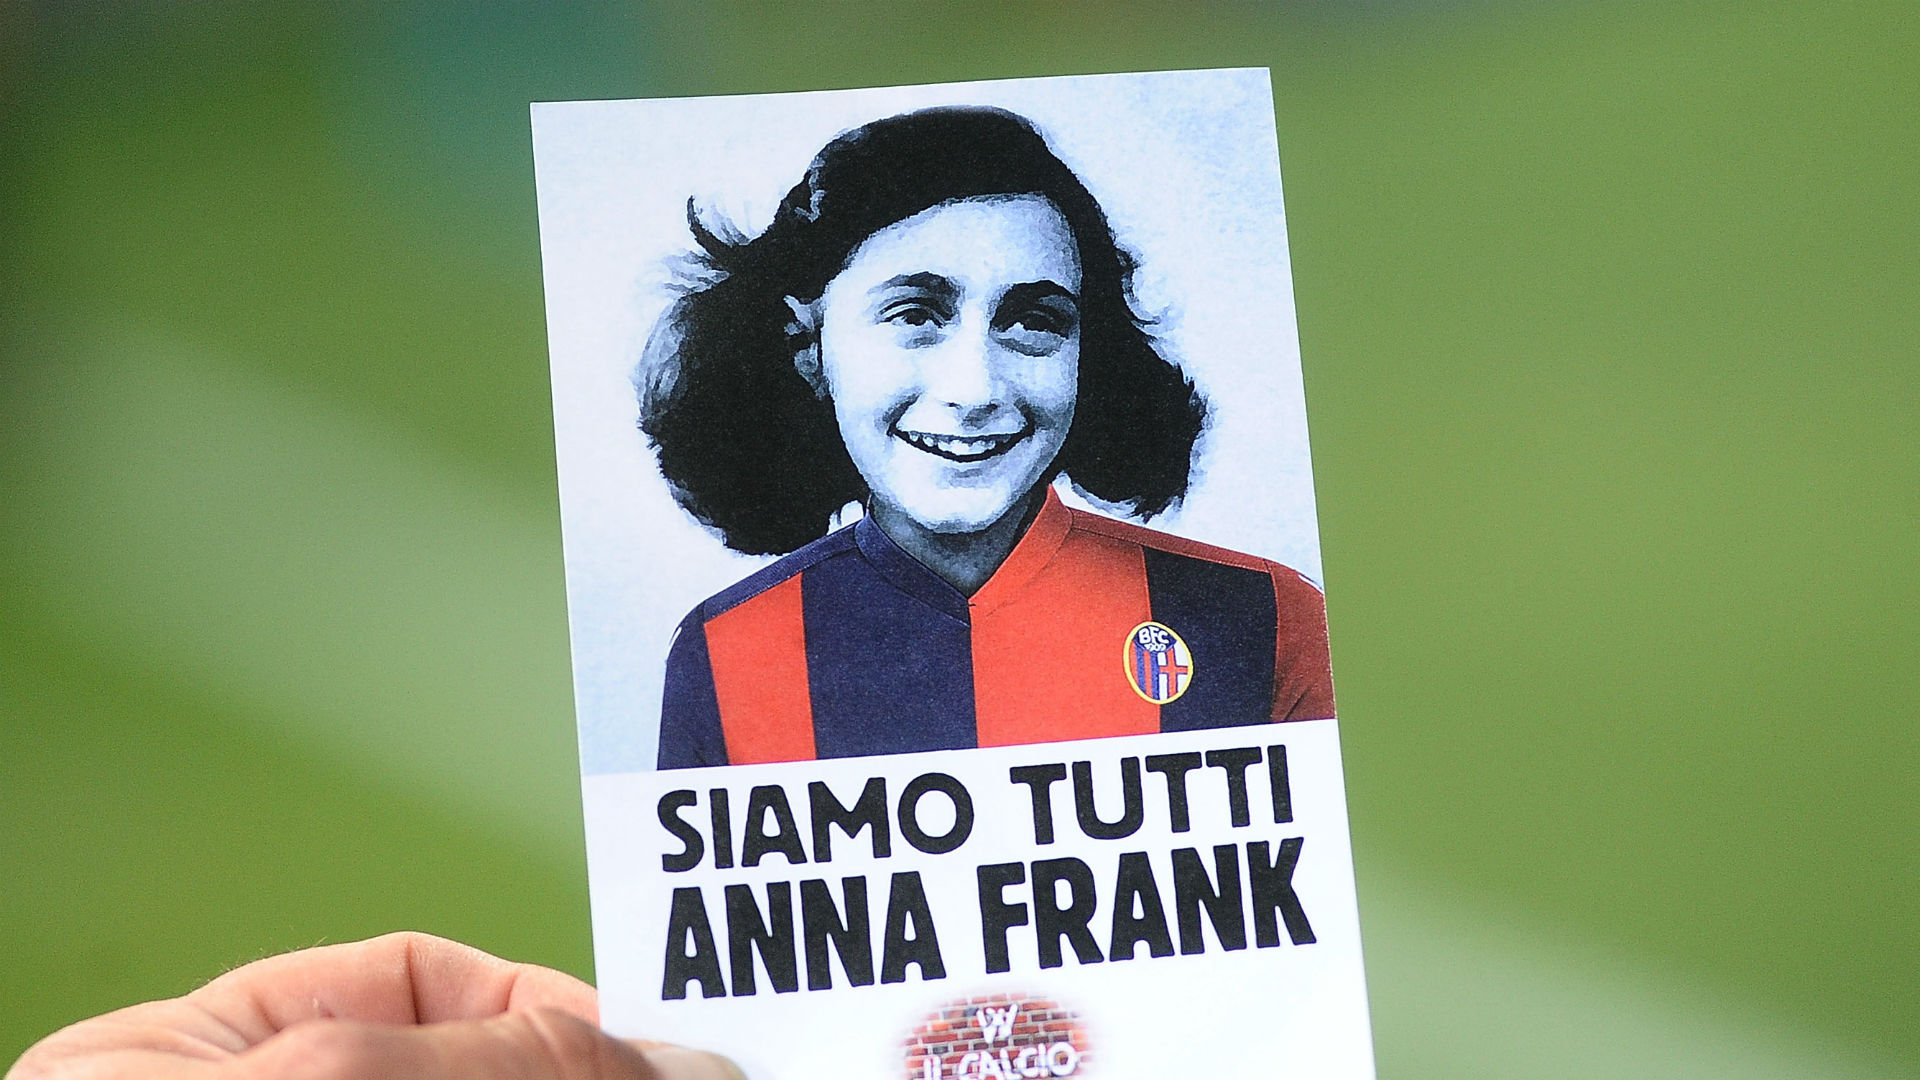 one of the stickers from the infamous match, with anne frank in the soccer team's jersey